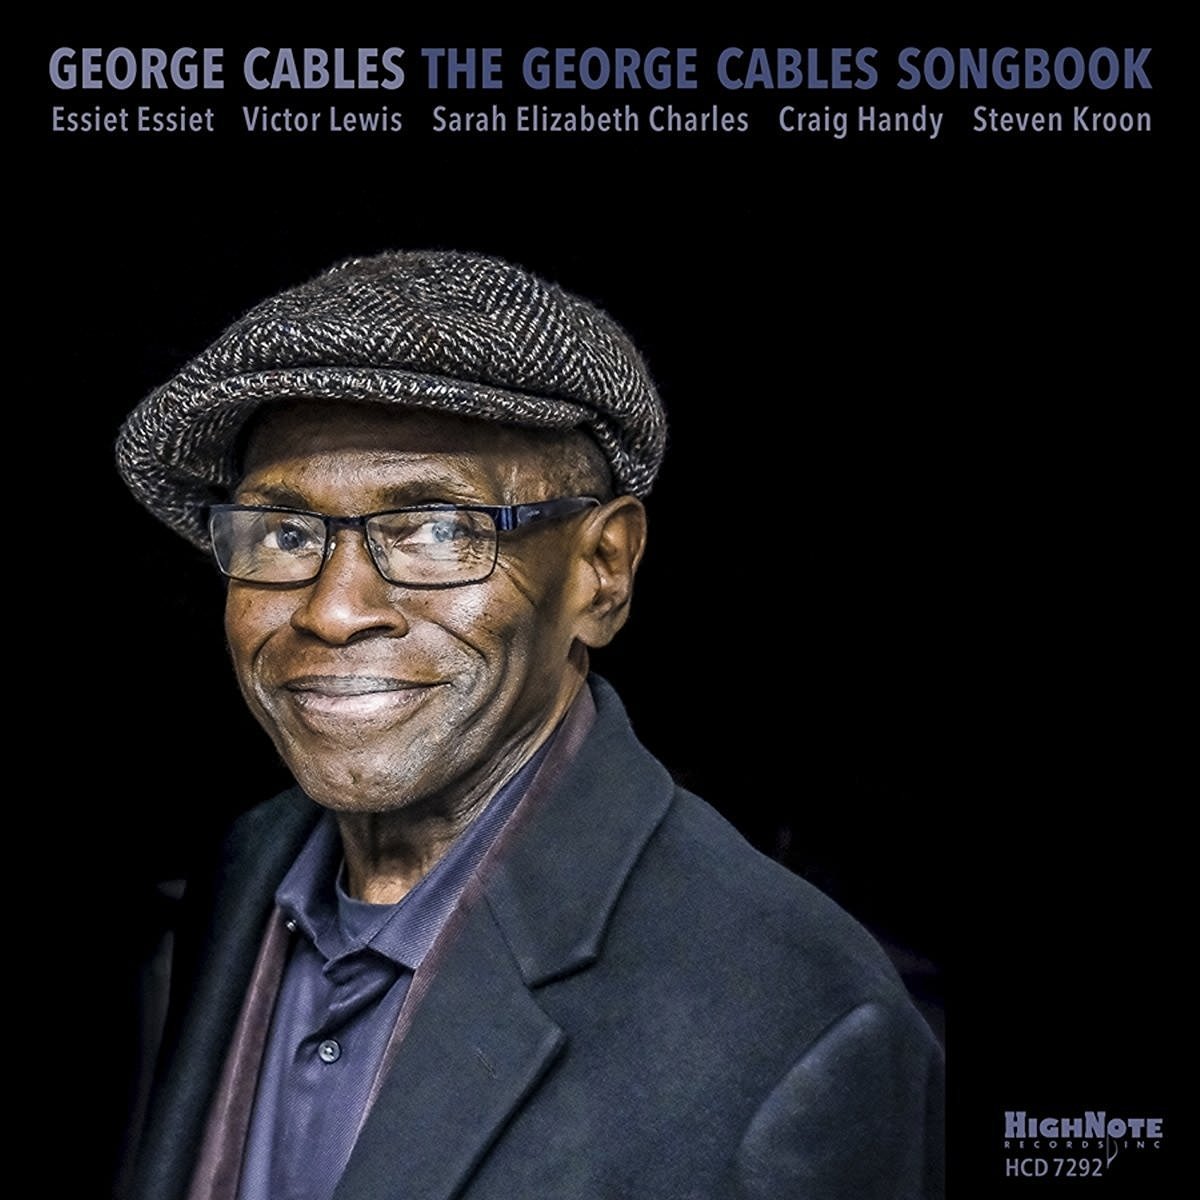 George Cables - The George Cables Songbook (2016) [HDTracks FLAC 24bit/88,2kHz]